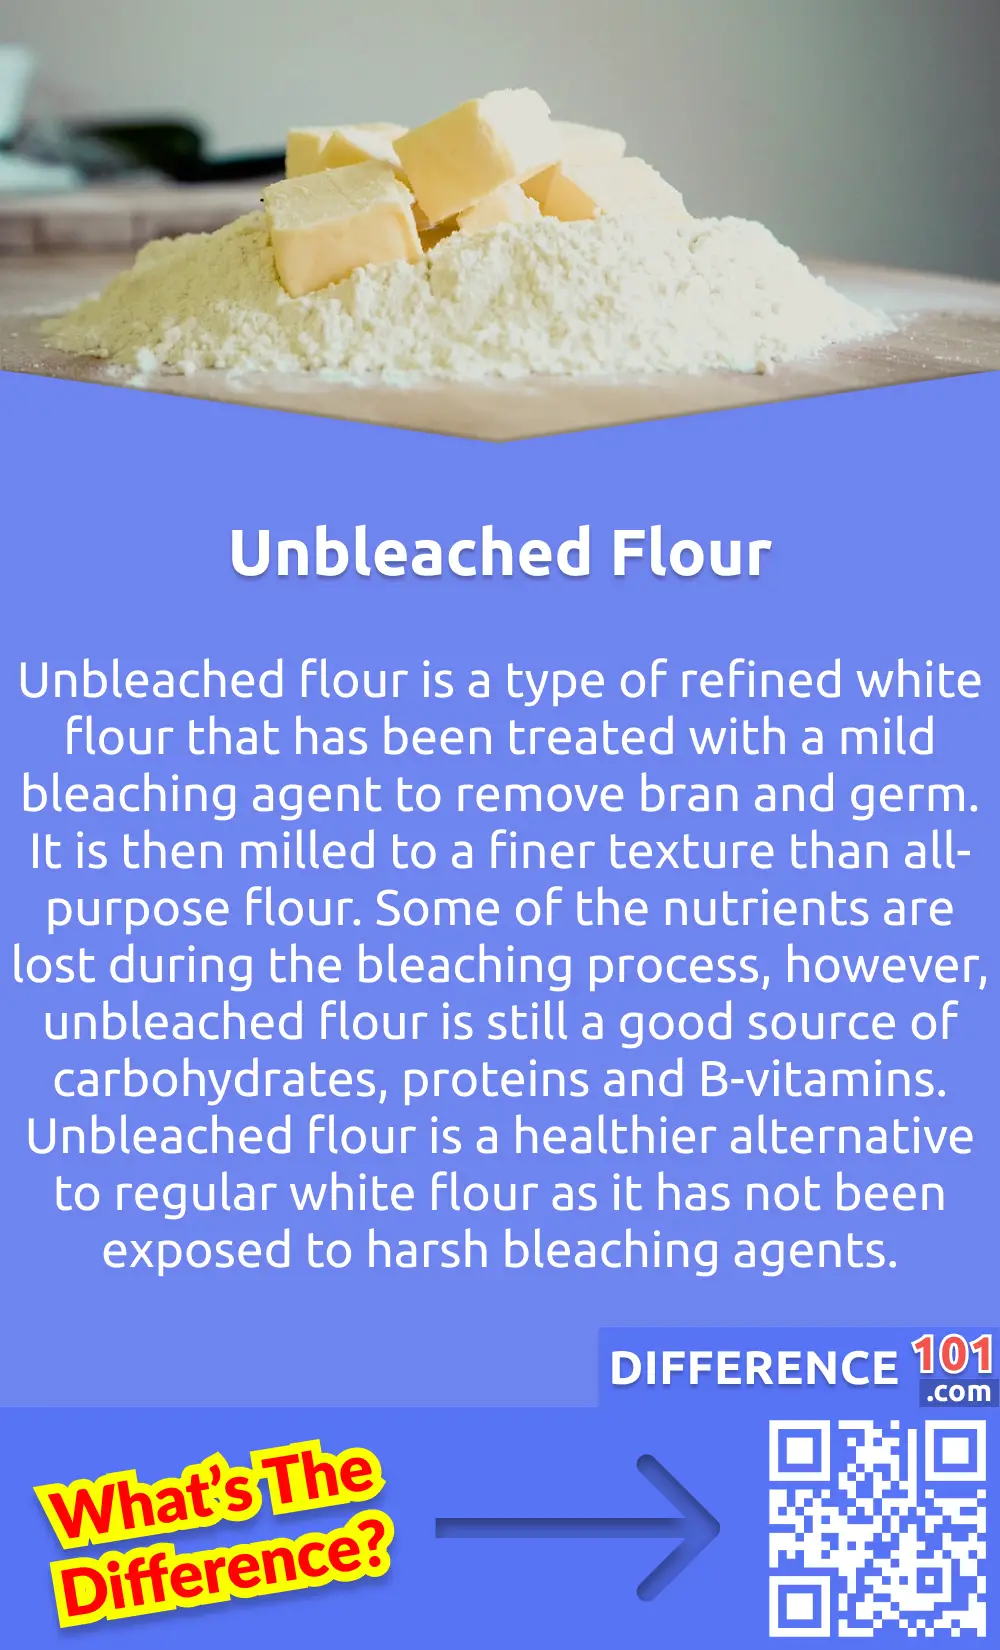 What Is Unbleached Flour? Unbleached flour is a type of refined white flour that has been treated with a mild bleaching agent to remove bran and germ. It is then milled to a finer texture than all-purpose flour. Some of the nutrients are lost during the bleaching process, however, unbleached flour is still a good source of carbohydrates, proteins and B-vitamins. Unbleached flour is a healthier alternative to regular white flour as it has not been exposed to harsh bleaching agents. Unbleached flour is suitable for many baking recipes such as cakes, cookies, biscuits and breads. It is also a great substitute for whole wheat flour in recipes, as it offers a lighter texture and a milder flavor. Unbleached flour is an essential ingredient in many baking recipes and can be used to create delicious baked goods.